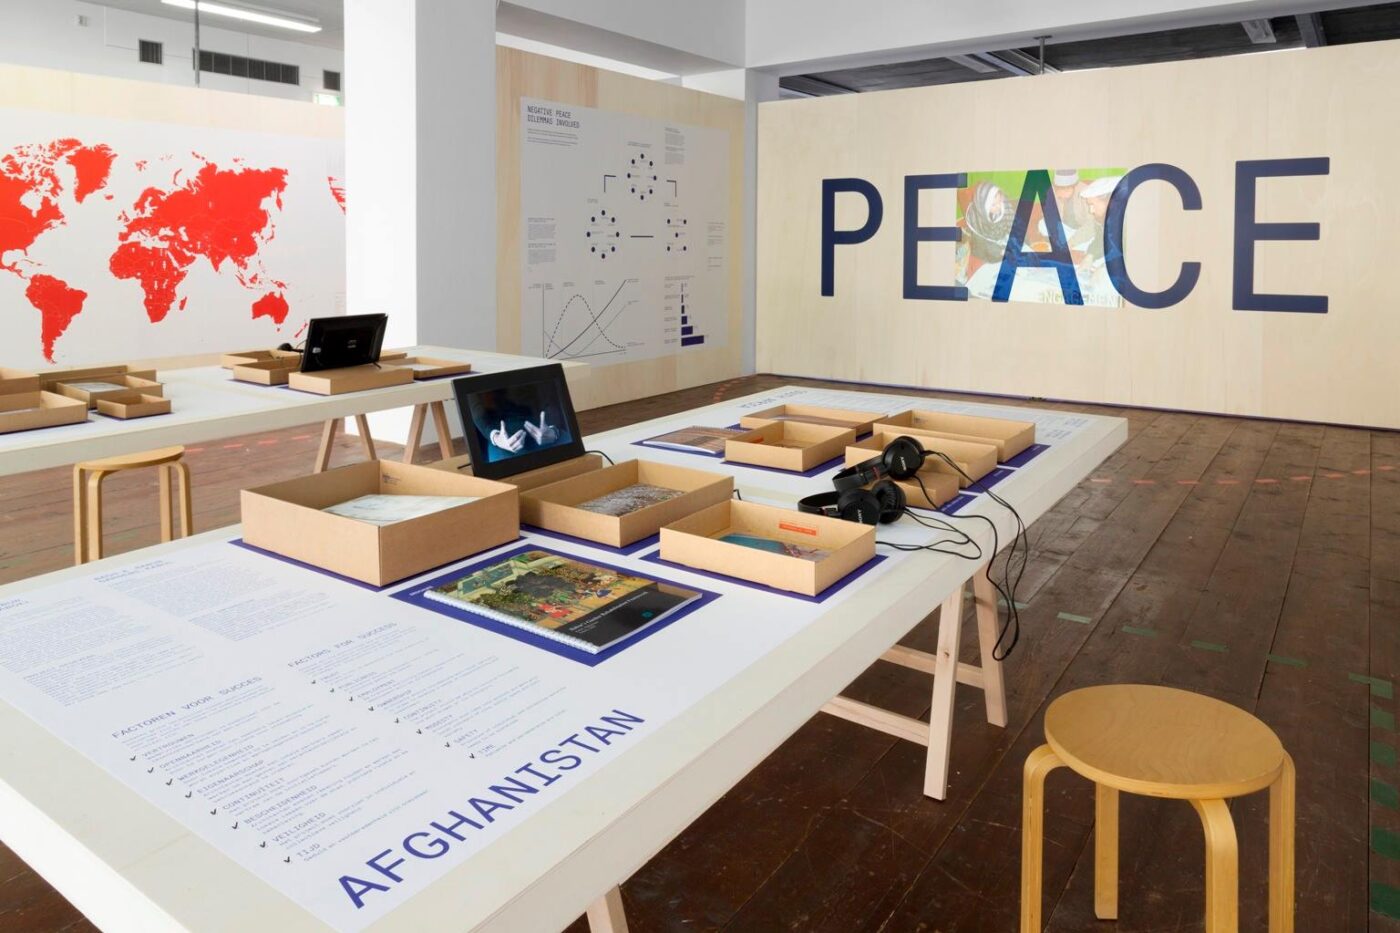 The Good Cause – City of Peace and Justice at Stroom The Hague